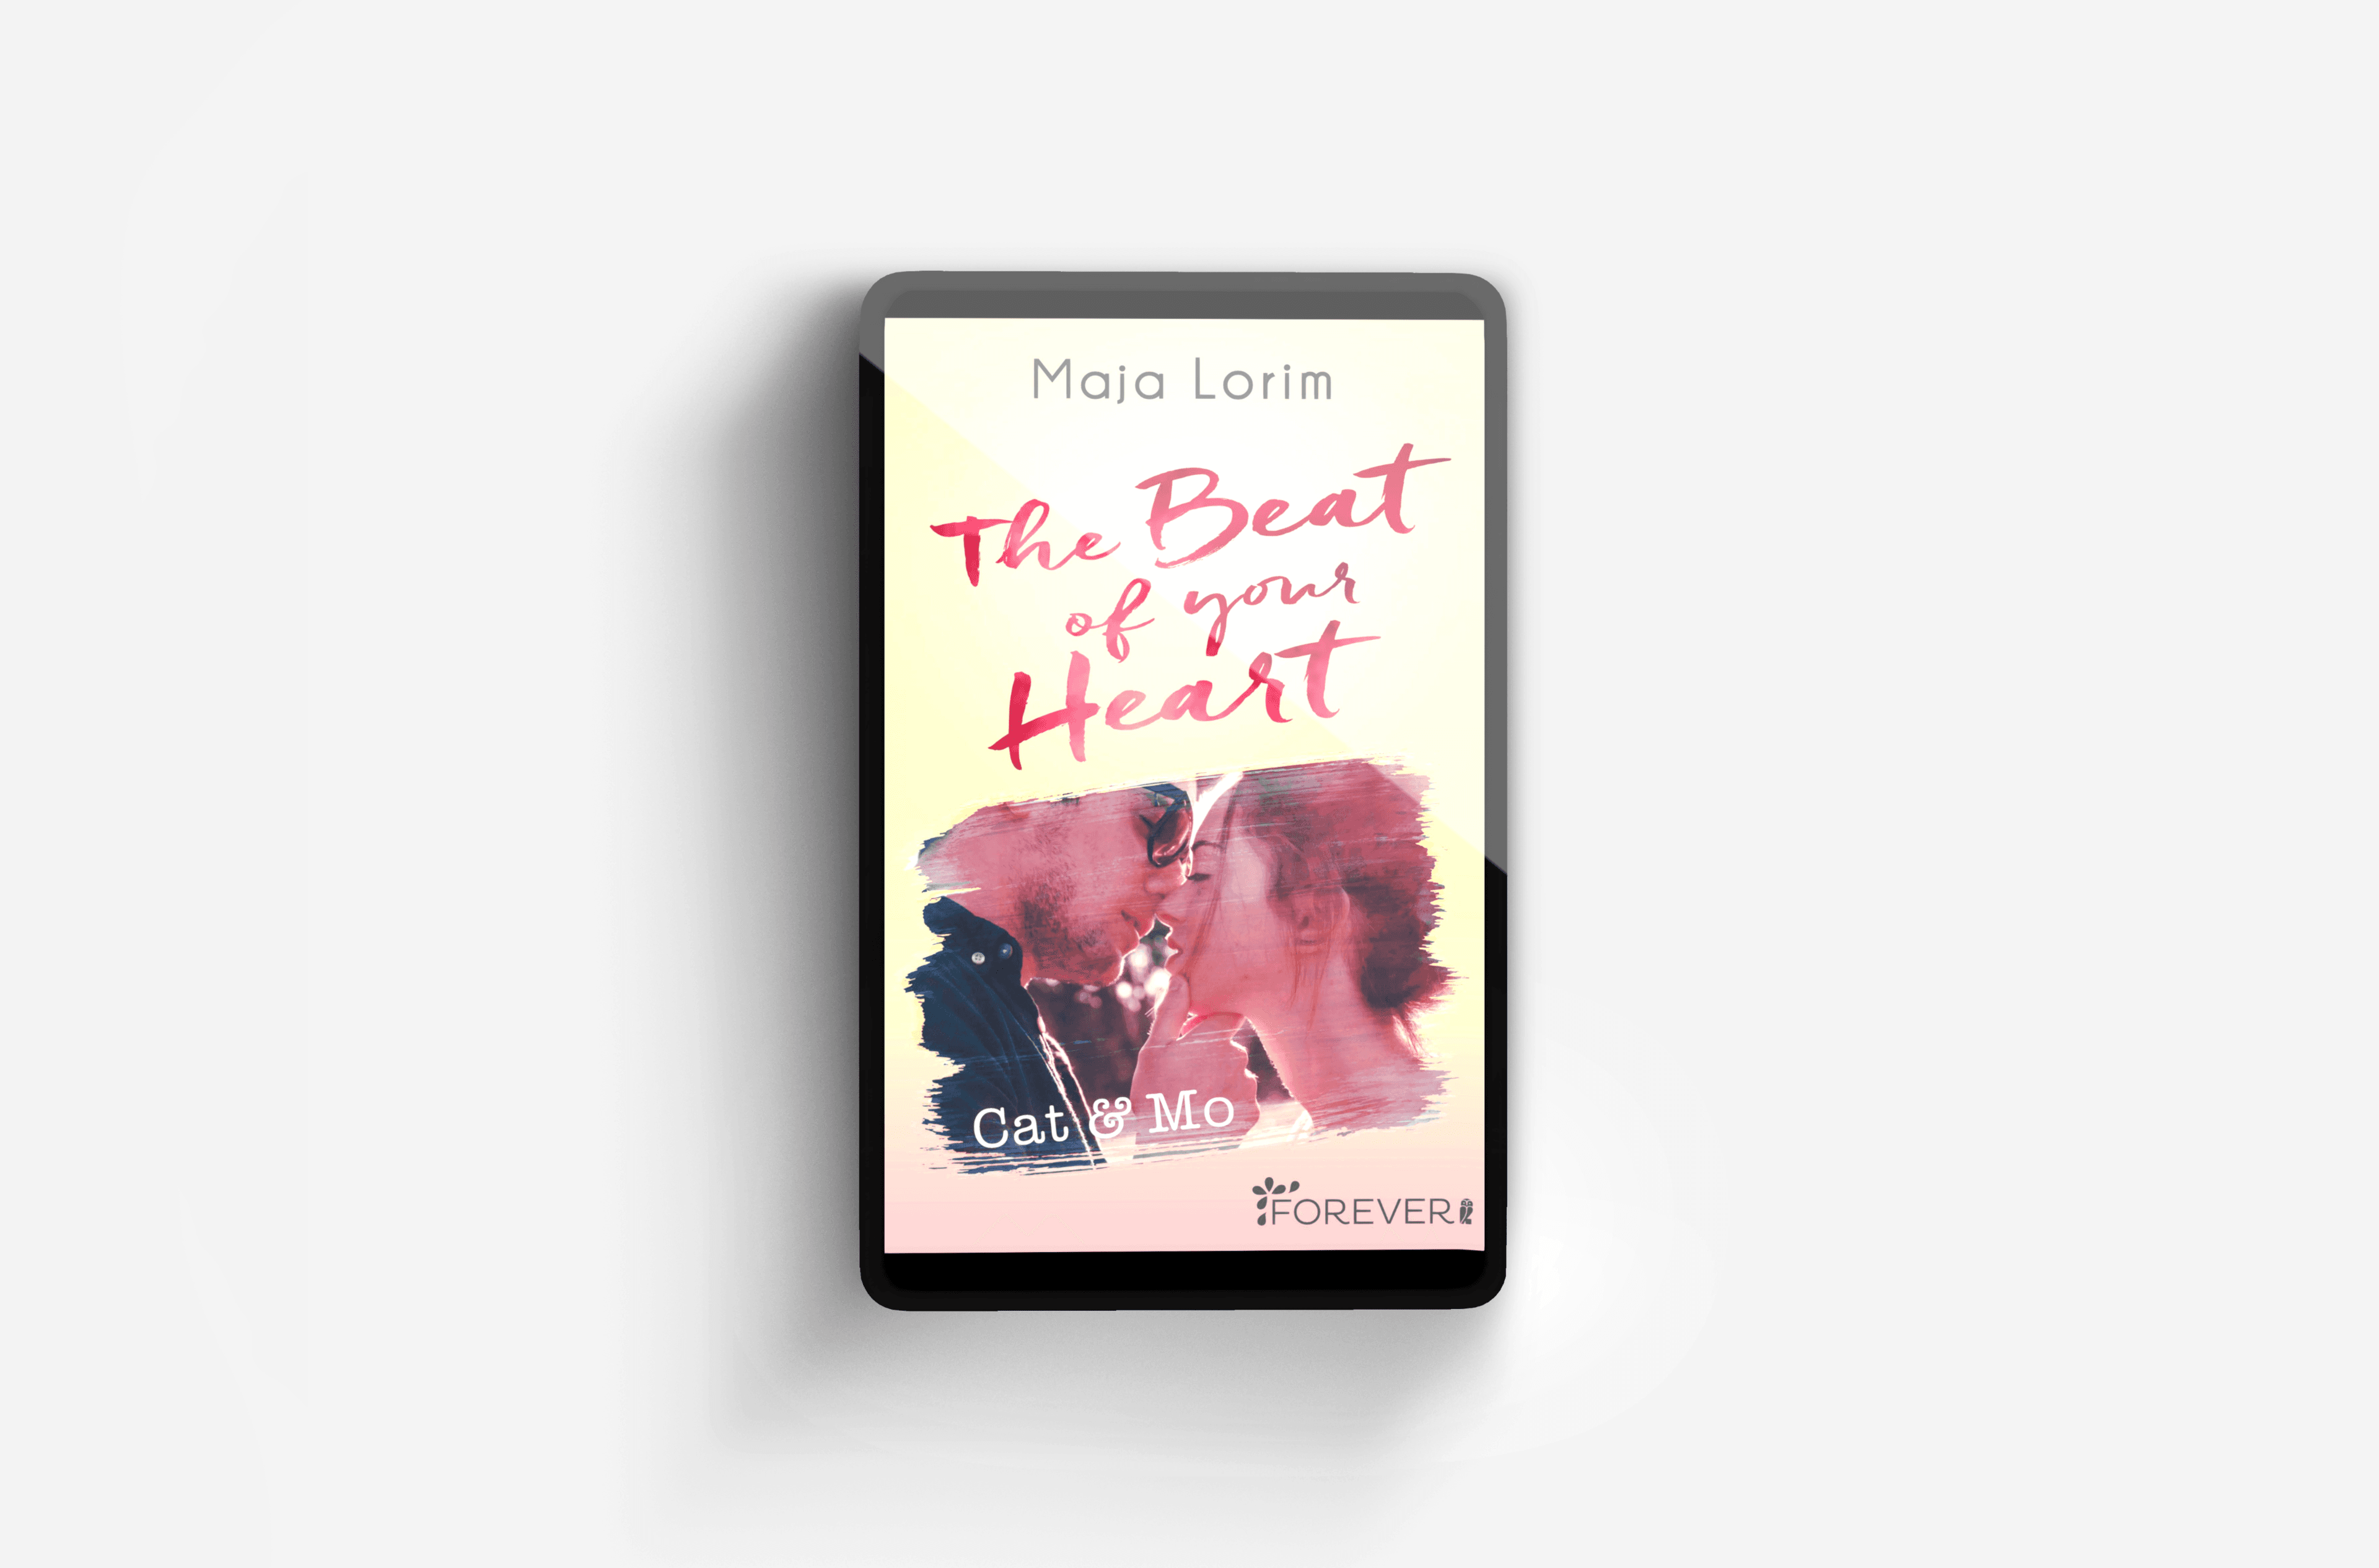 Buchcover von The Beat of your Heart